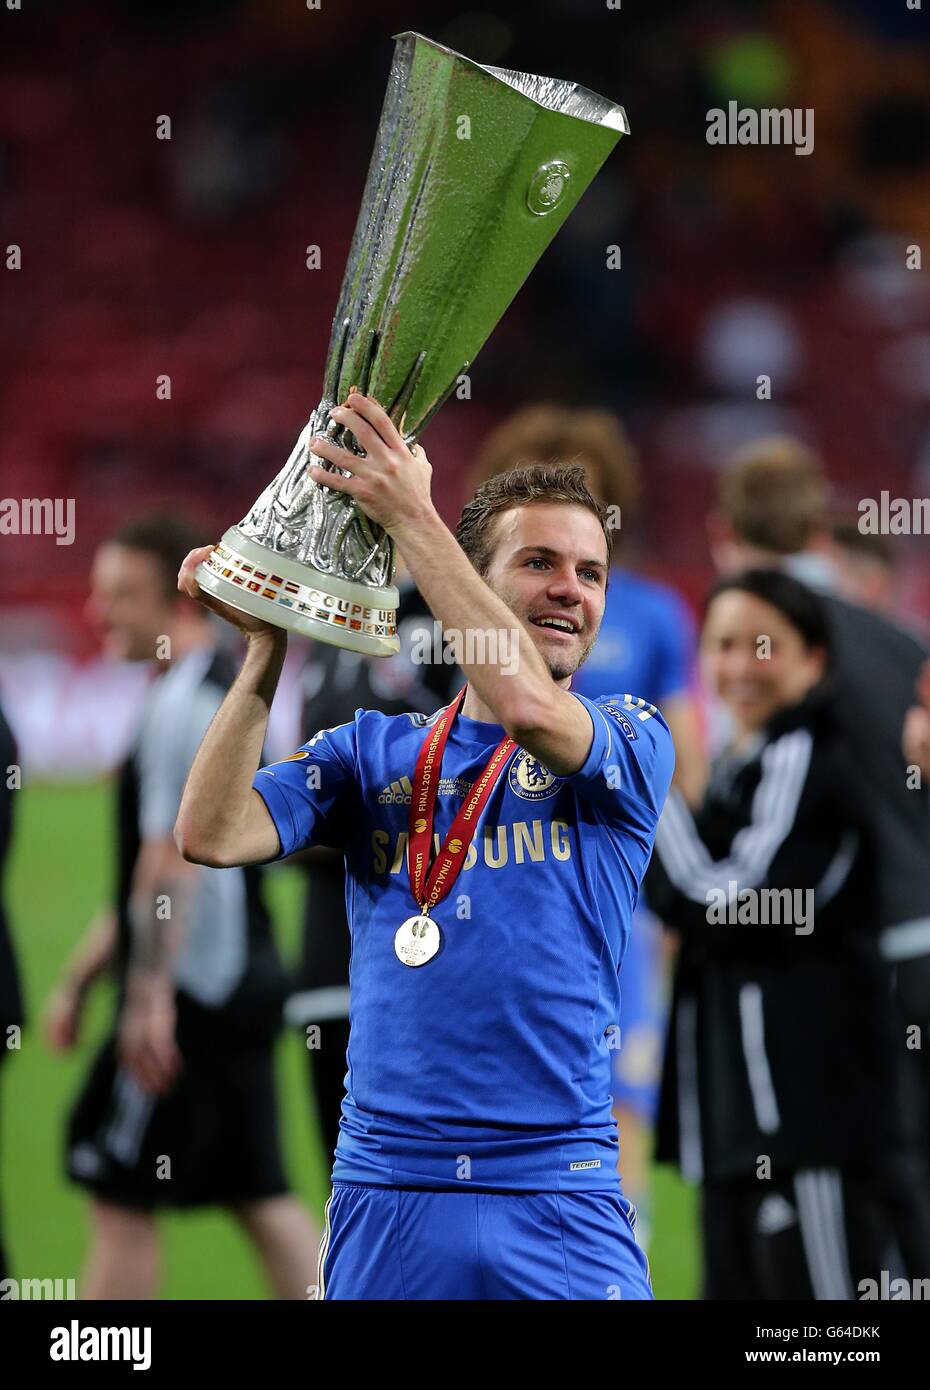 Soccer - UEFA Europa League Final - Benfica v Chelsea - Amsterdam Arena. Chelsea's Juan Mata celebrates with the UEFA Europa League trophy after the game Stock Photo